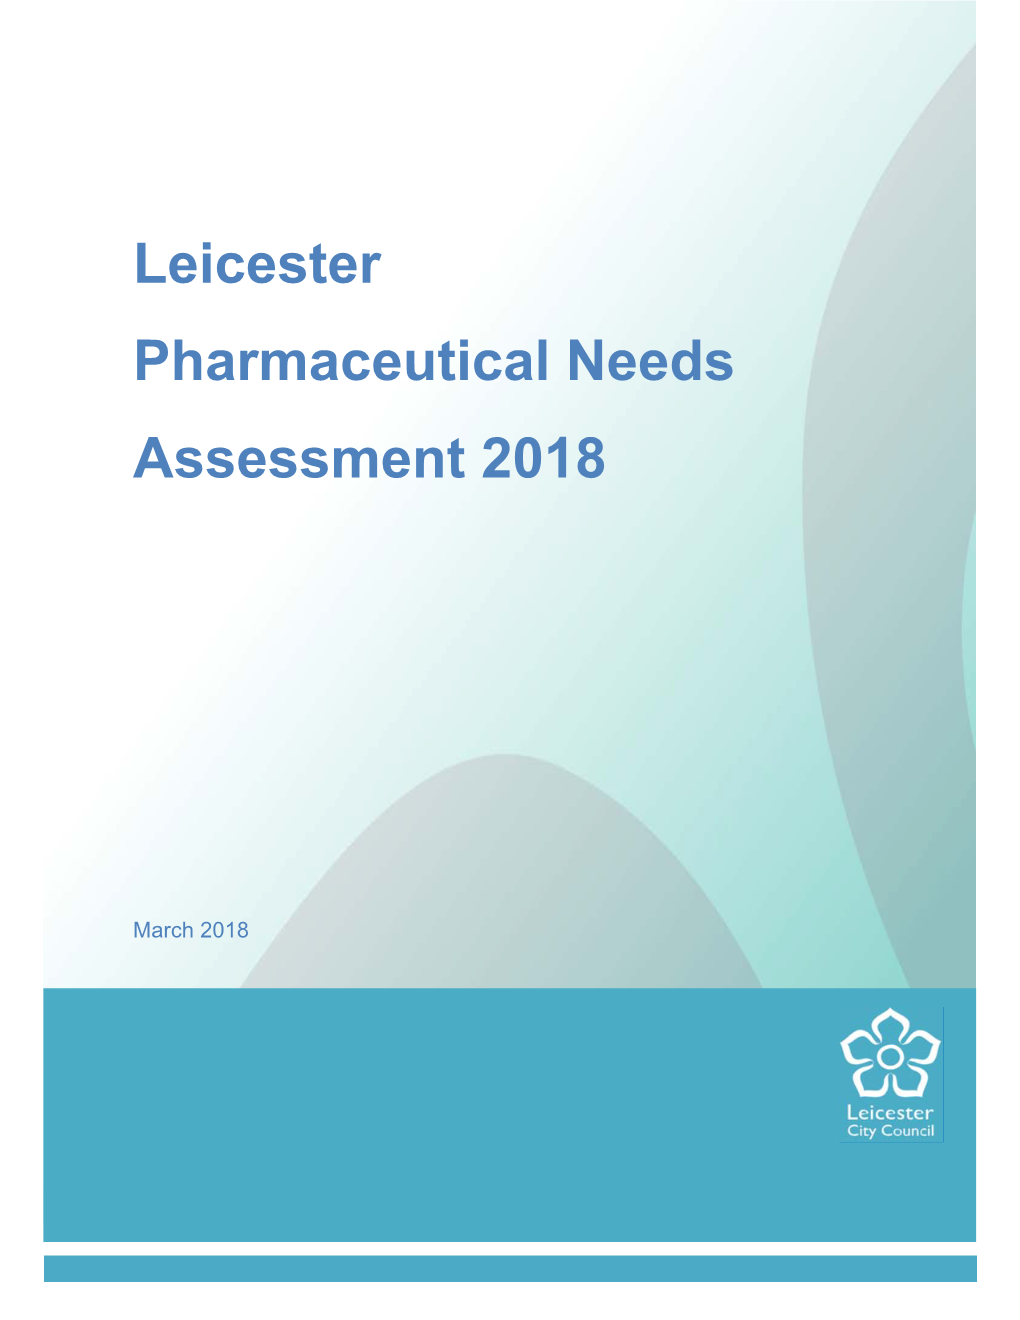 Leicester Pharmaceutical Needs Assessment 2018